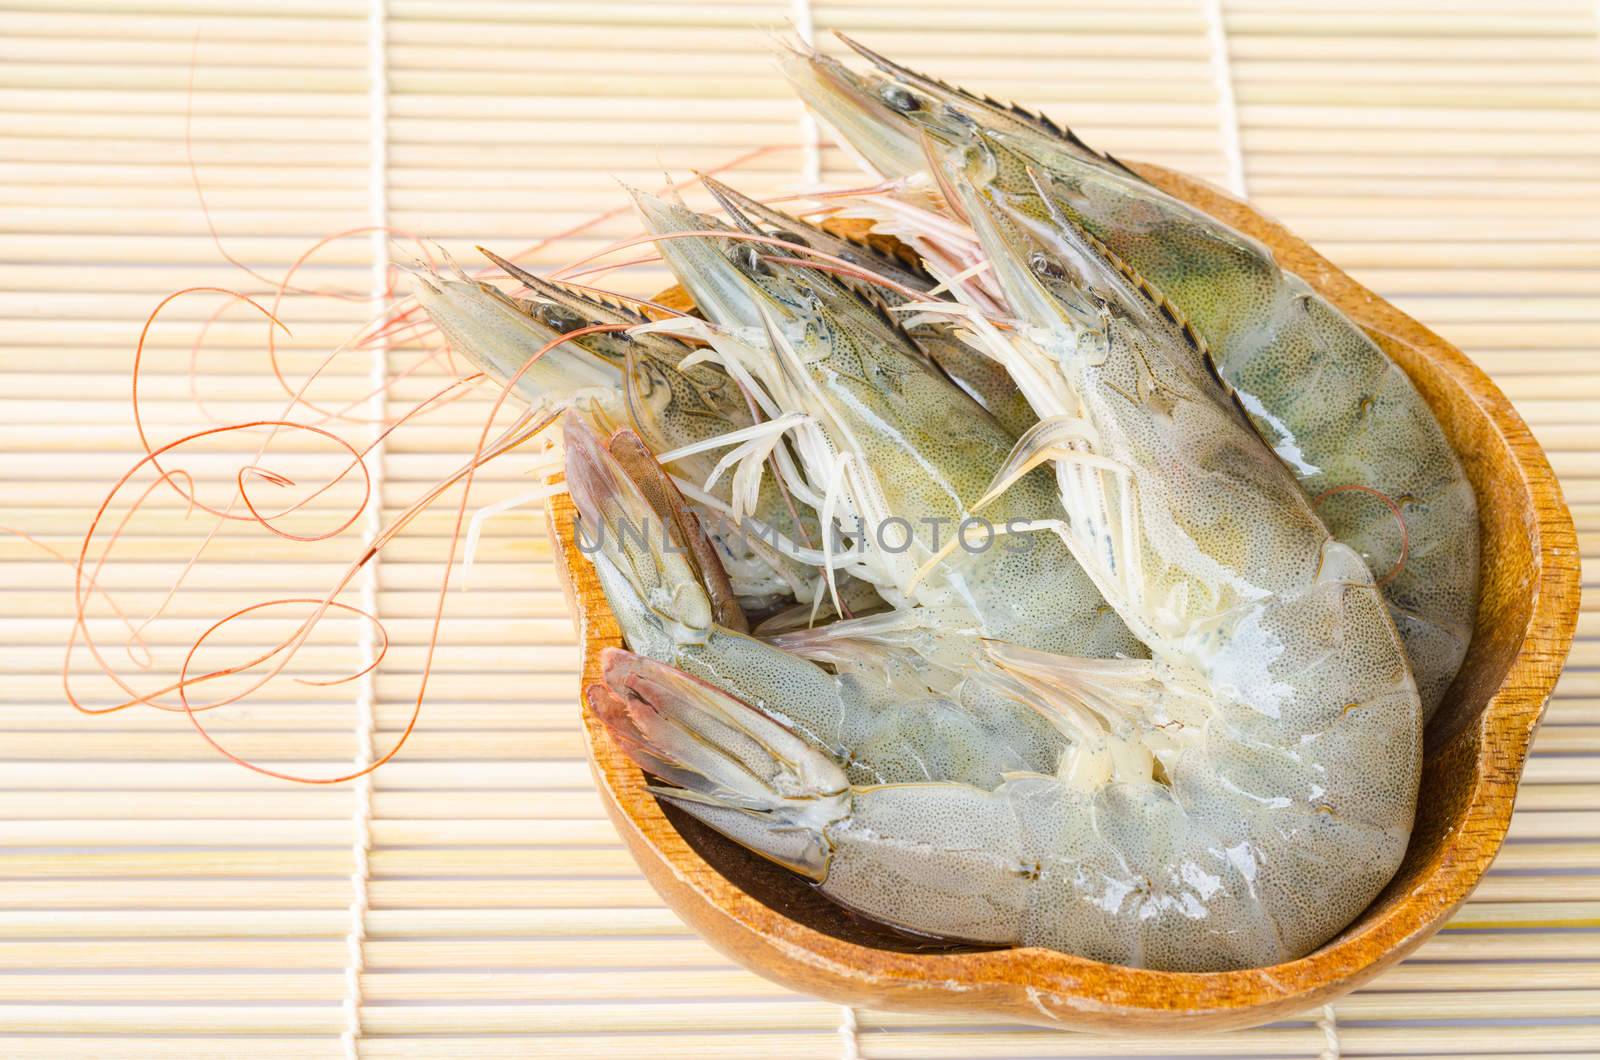 Fresh Gulf Shrimps in cup on wood background.